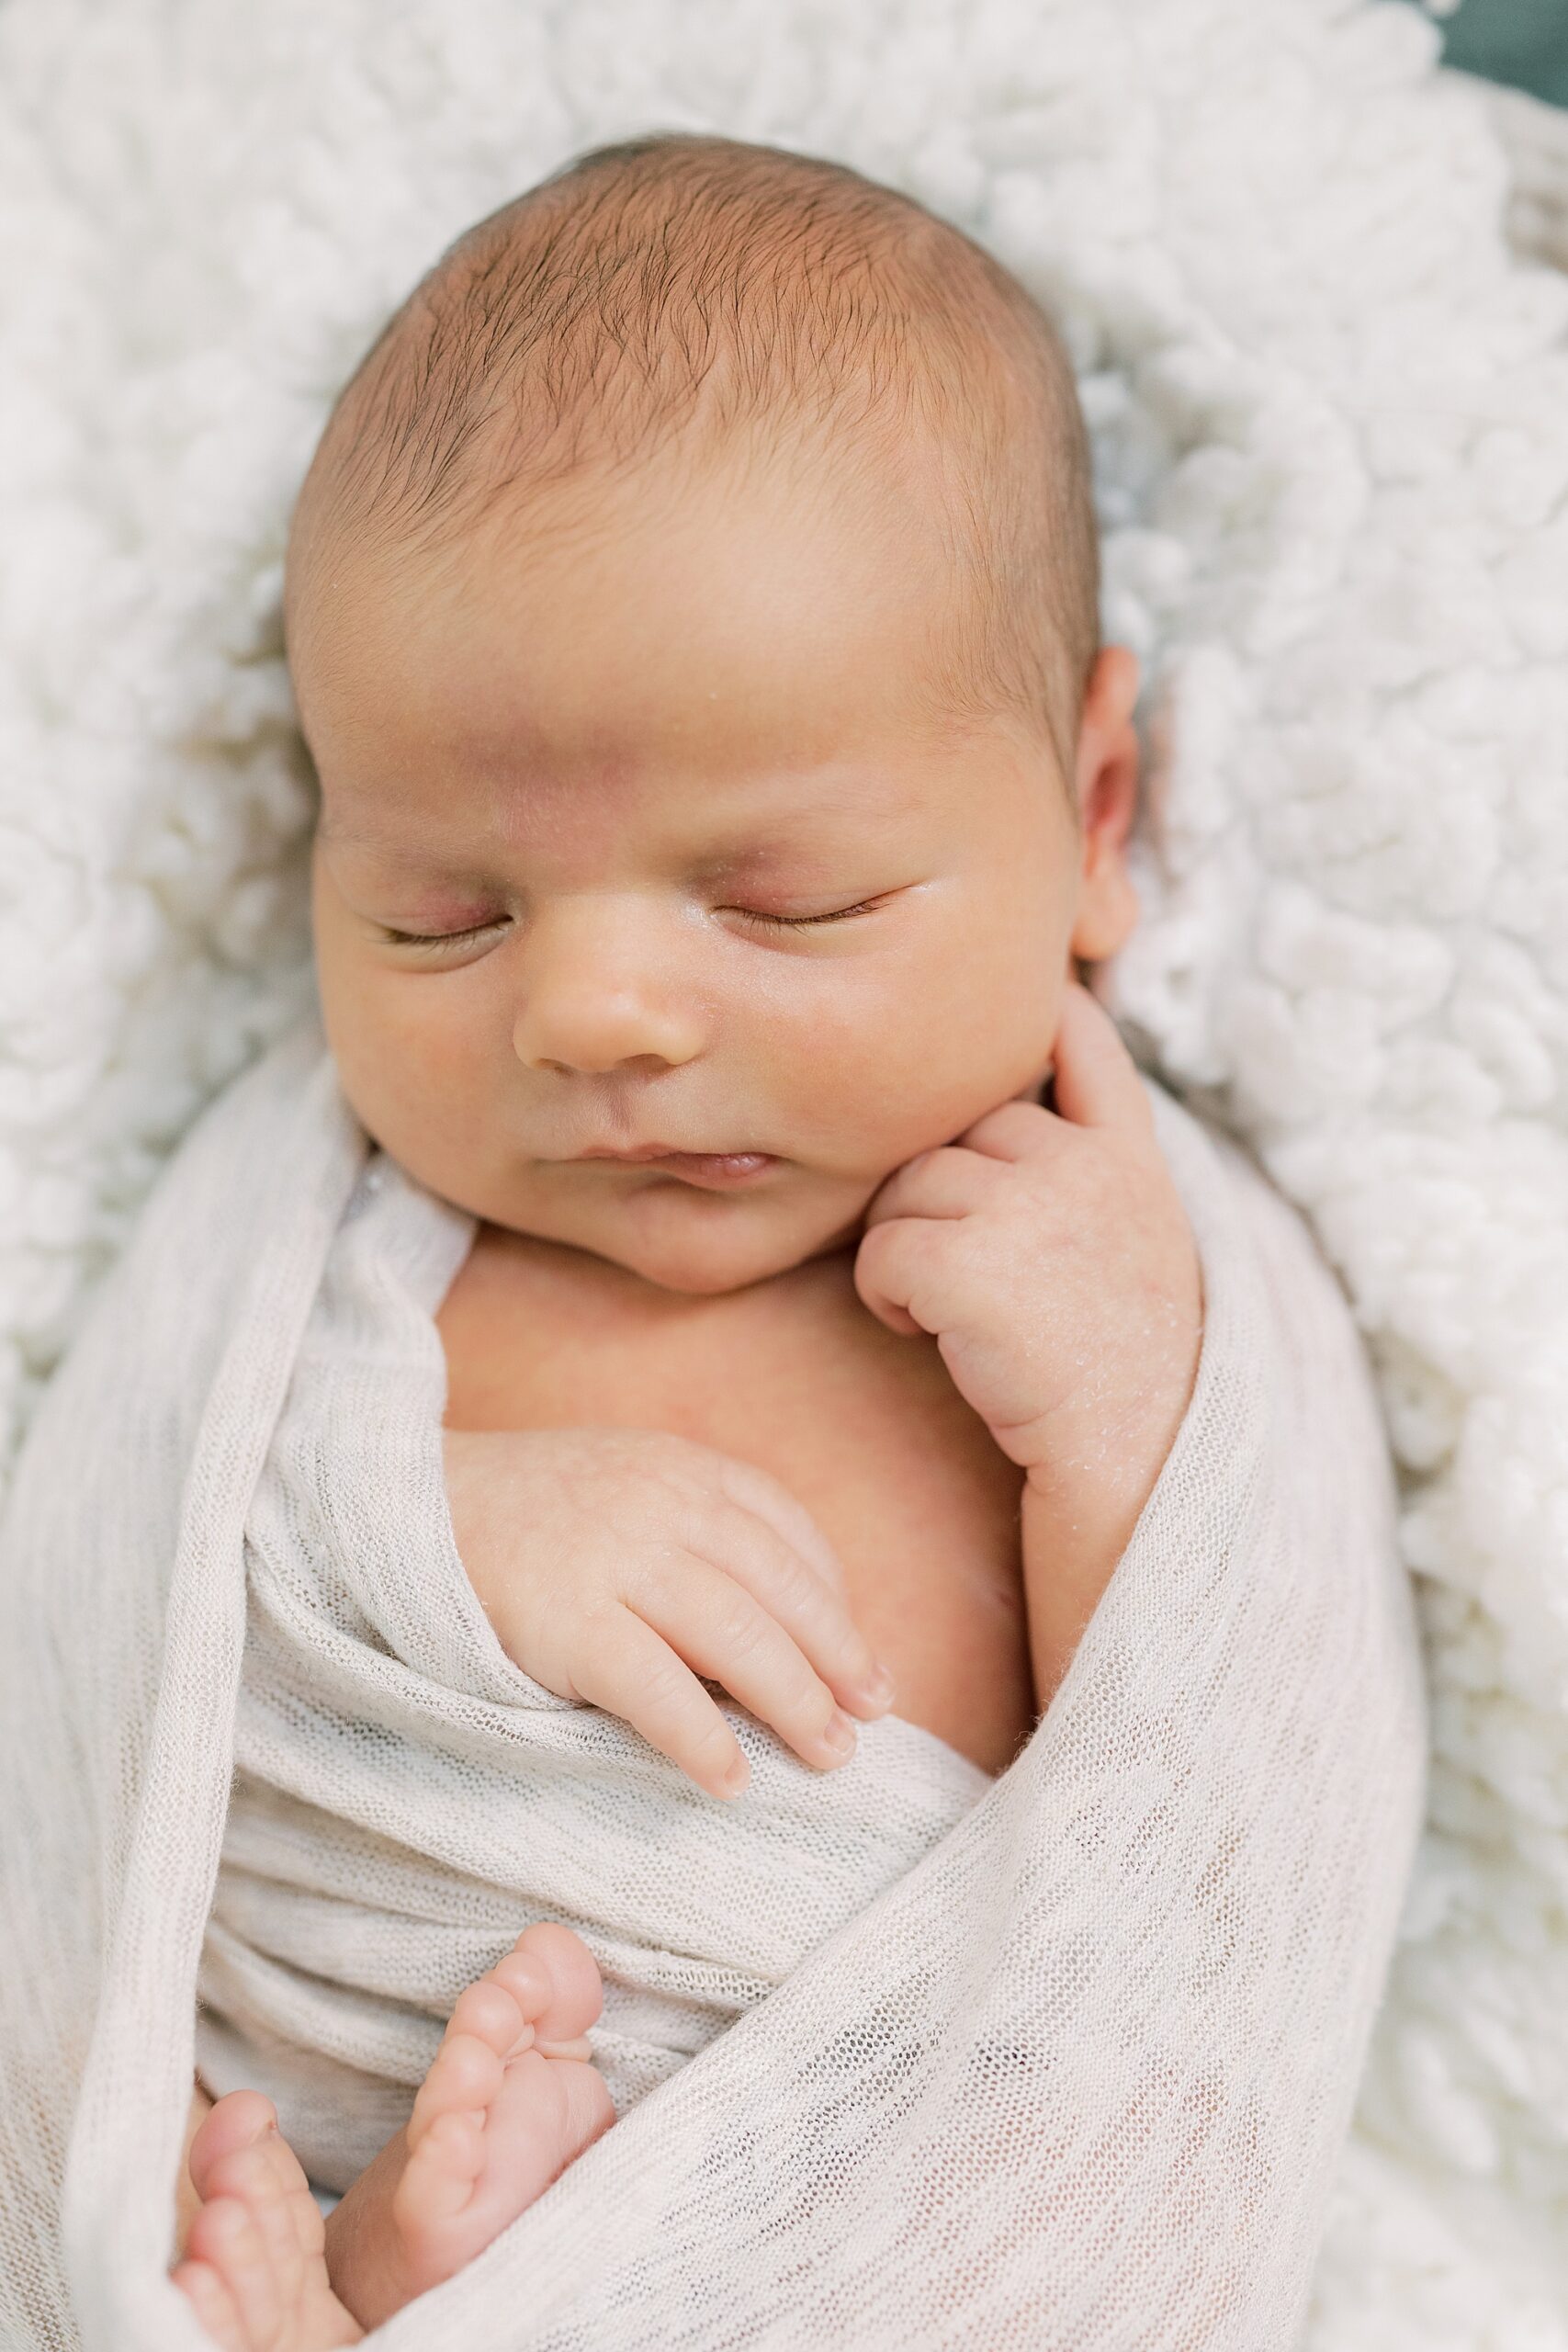 baby sleeps with hand under chin in white wrap during PA newborn portraits at home